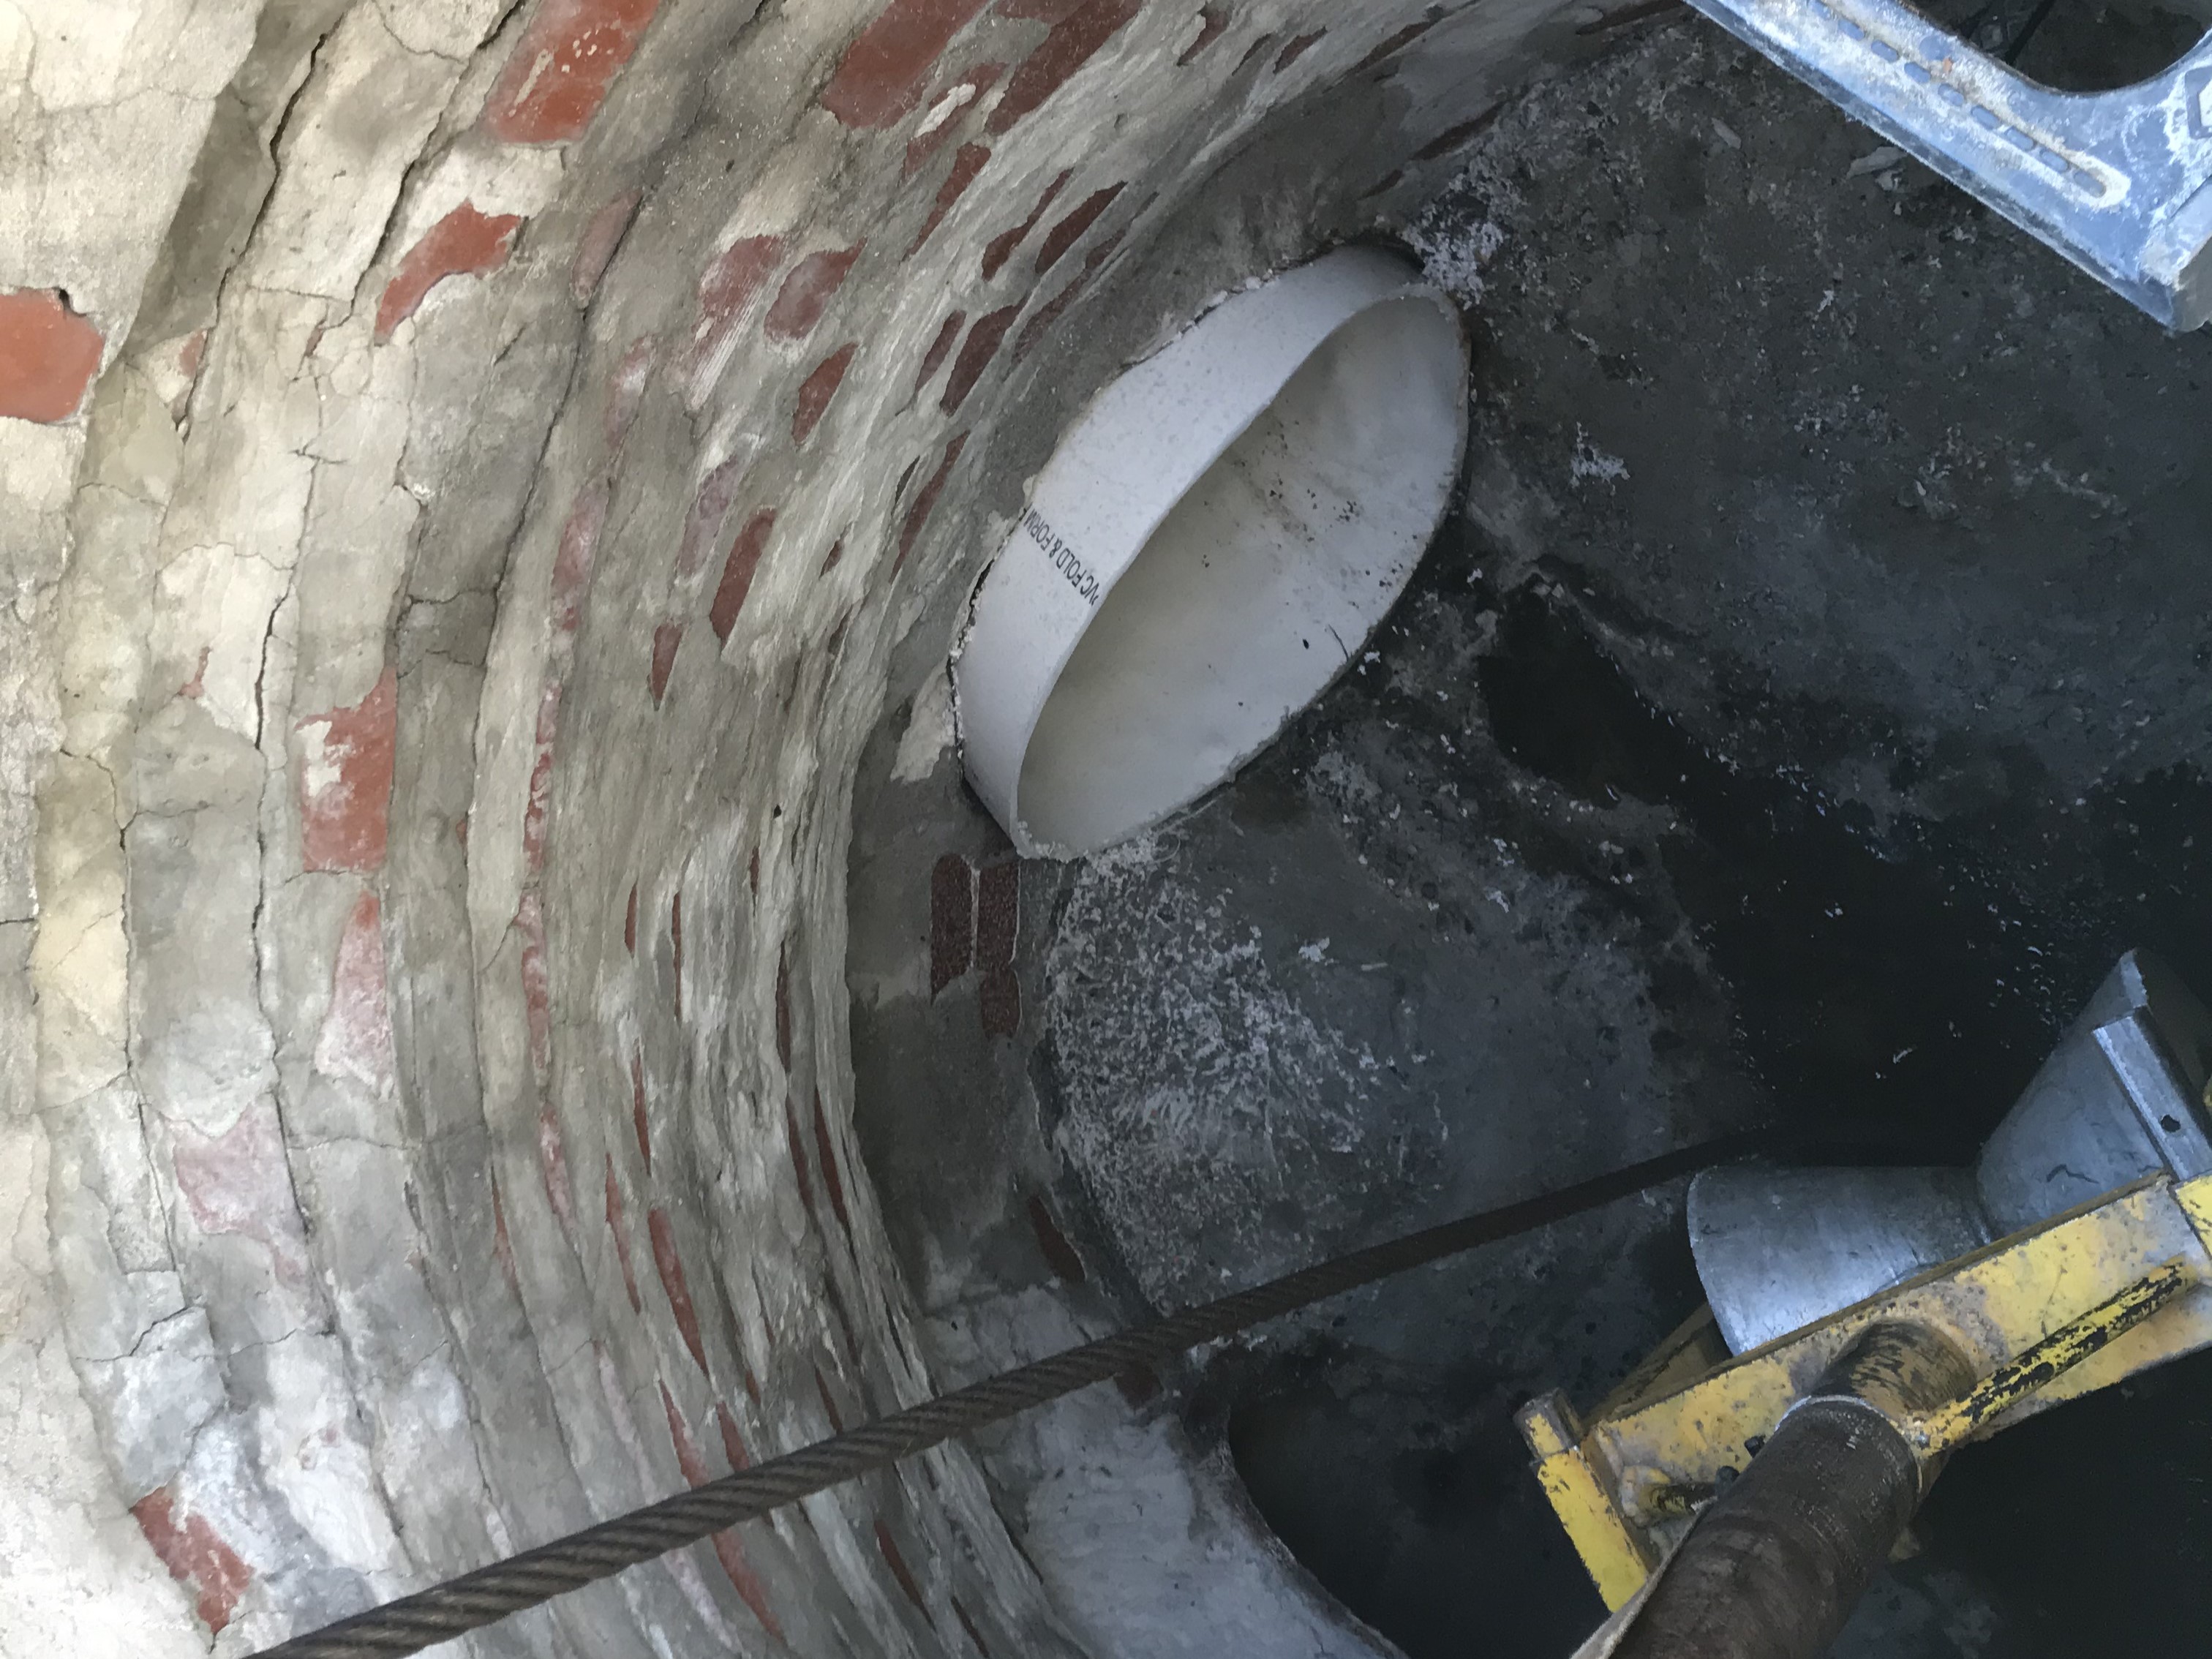 An image of the inside of a manhole cover where a winch cable is being used to pull the white PVC liner through the pipe